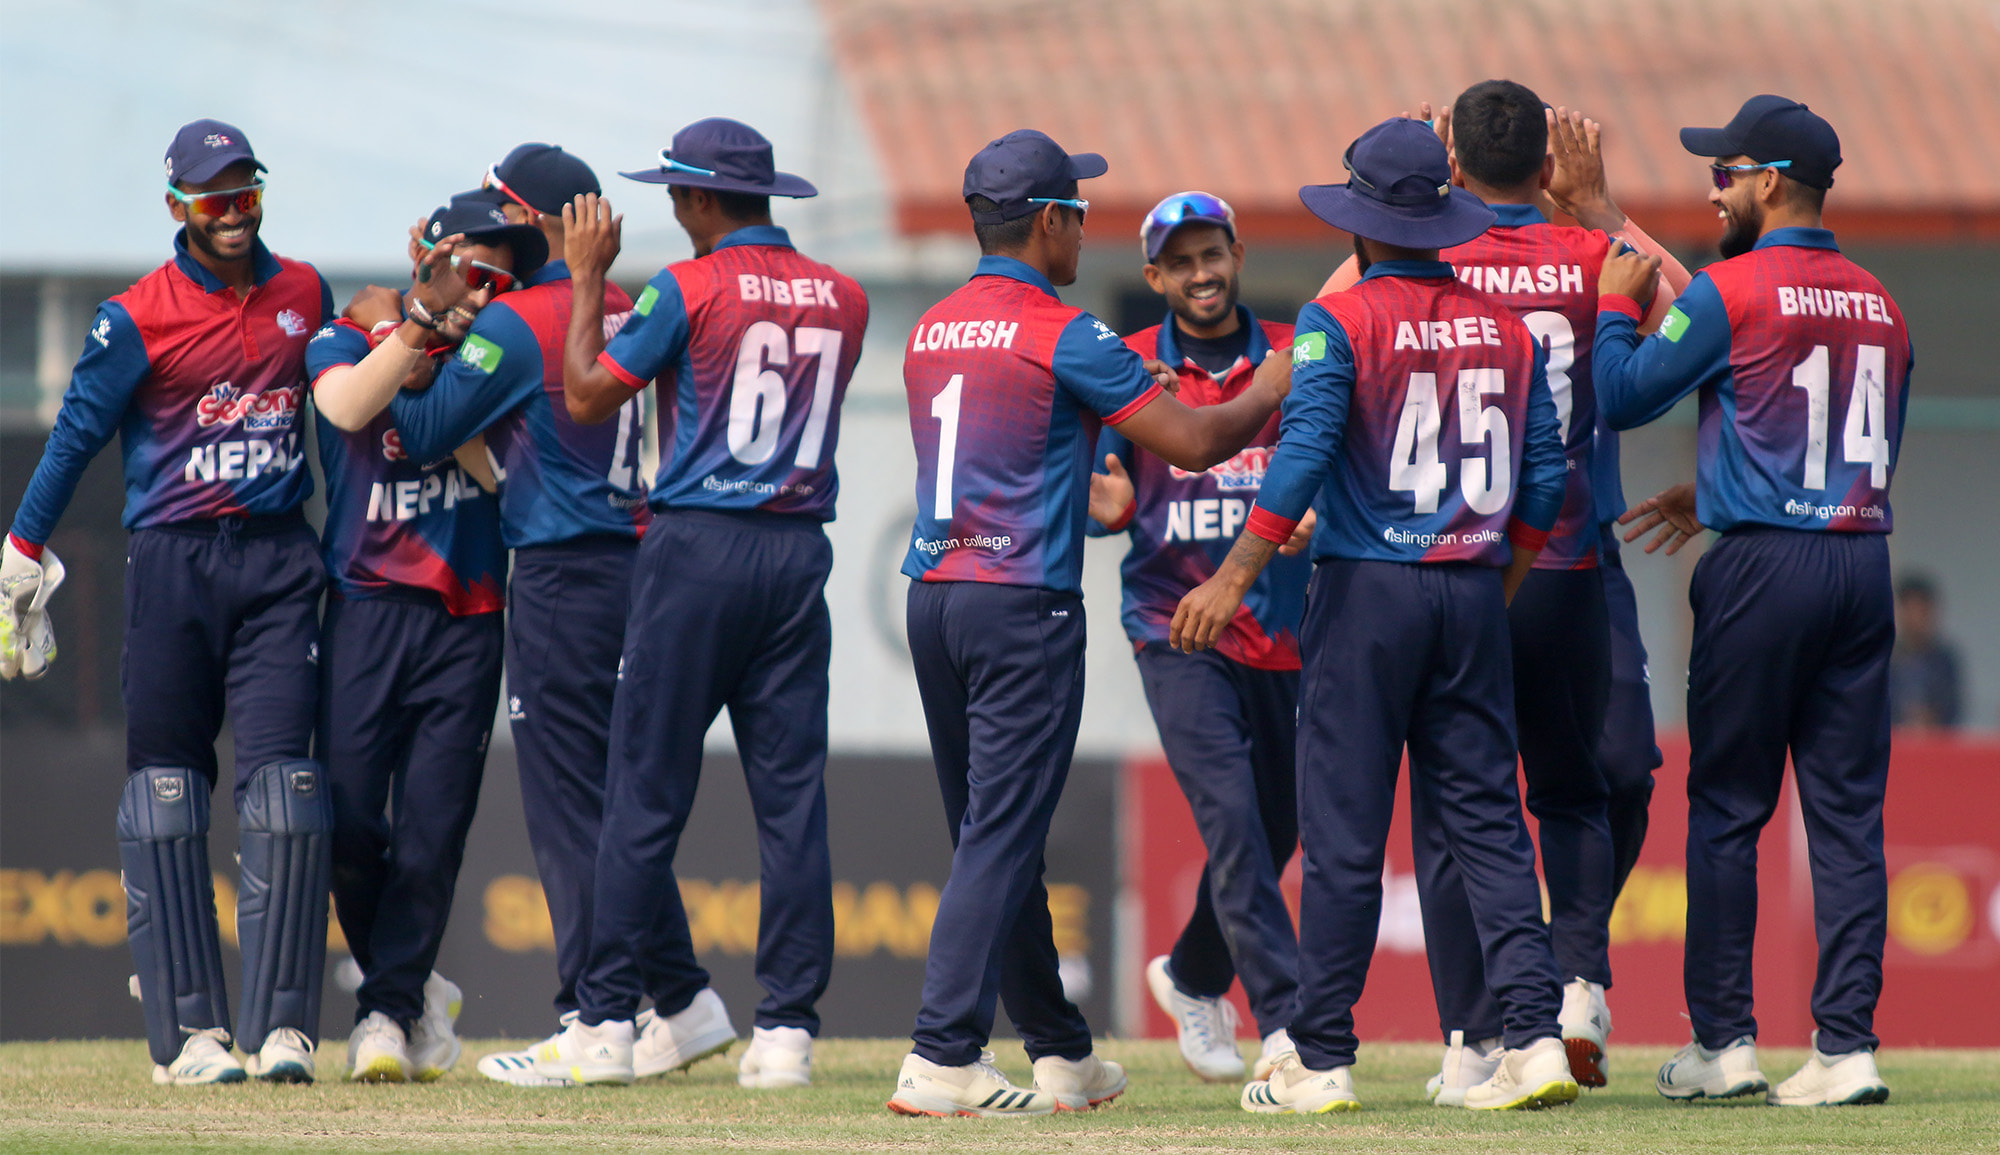 Nepal reaches final in tri-nation series one match prior